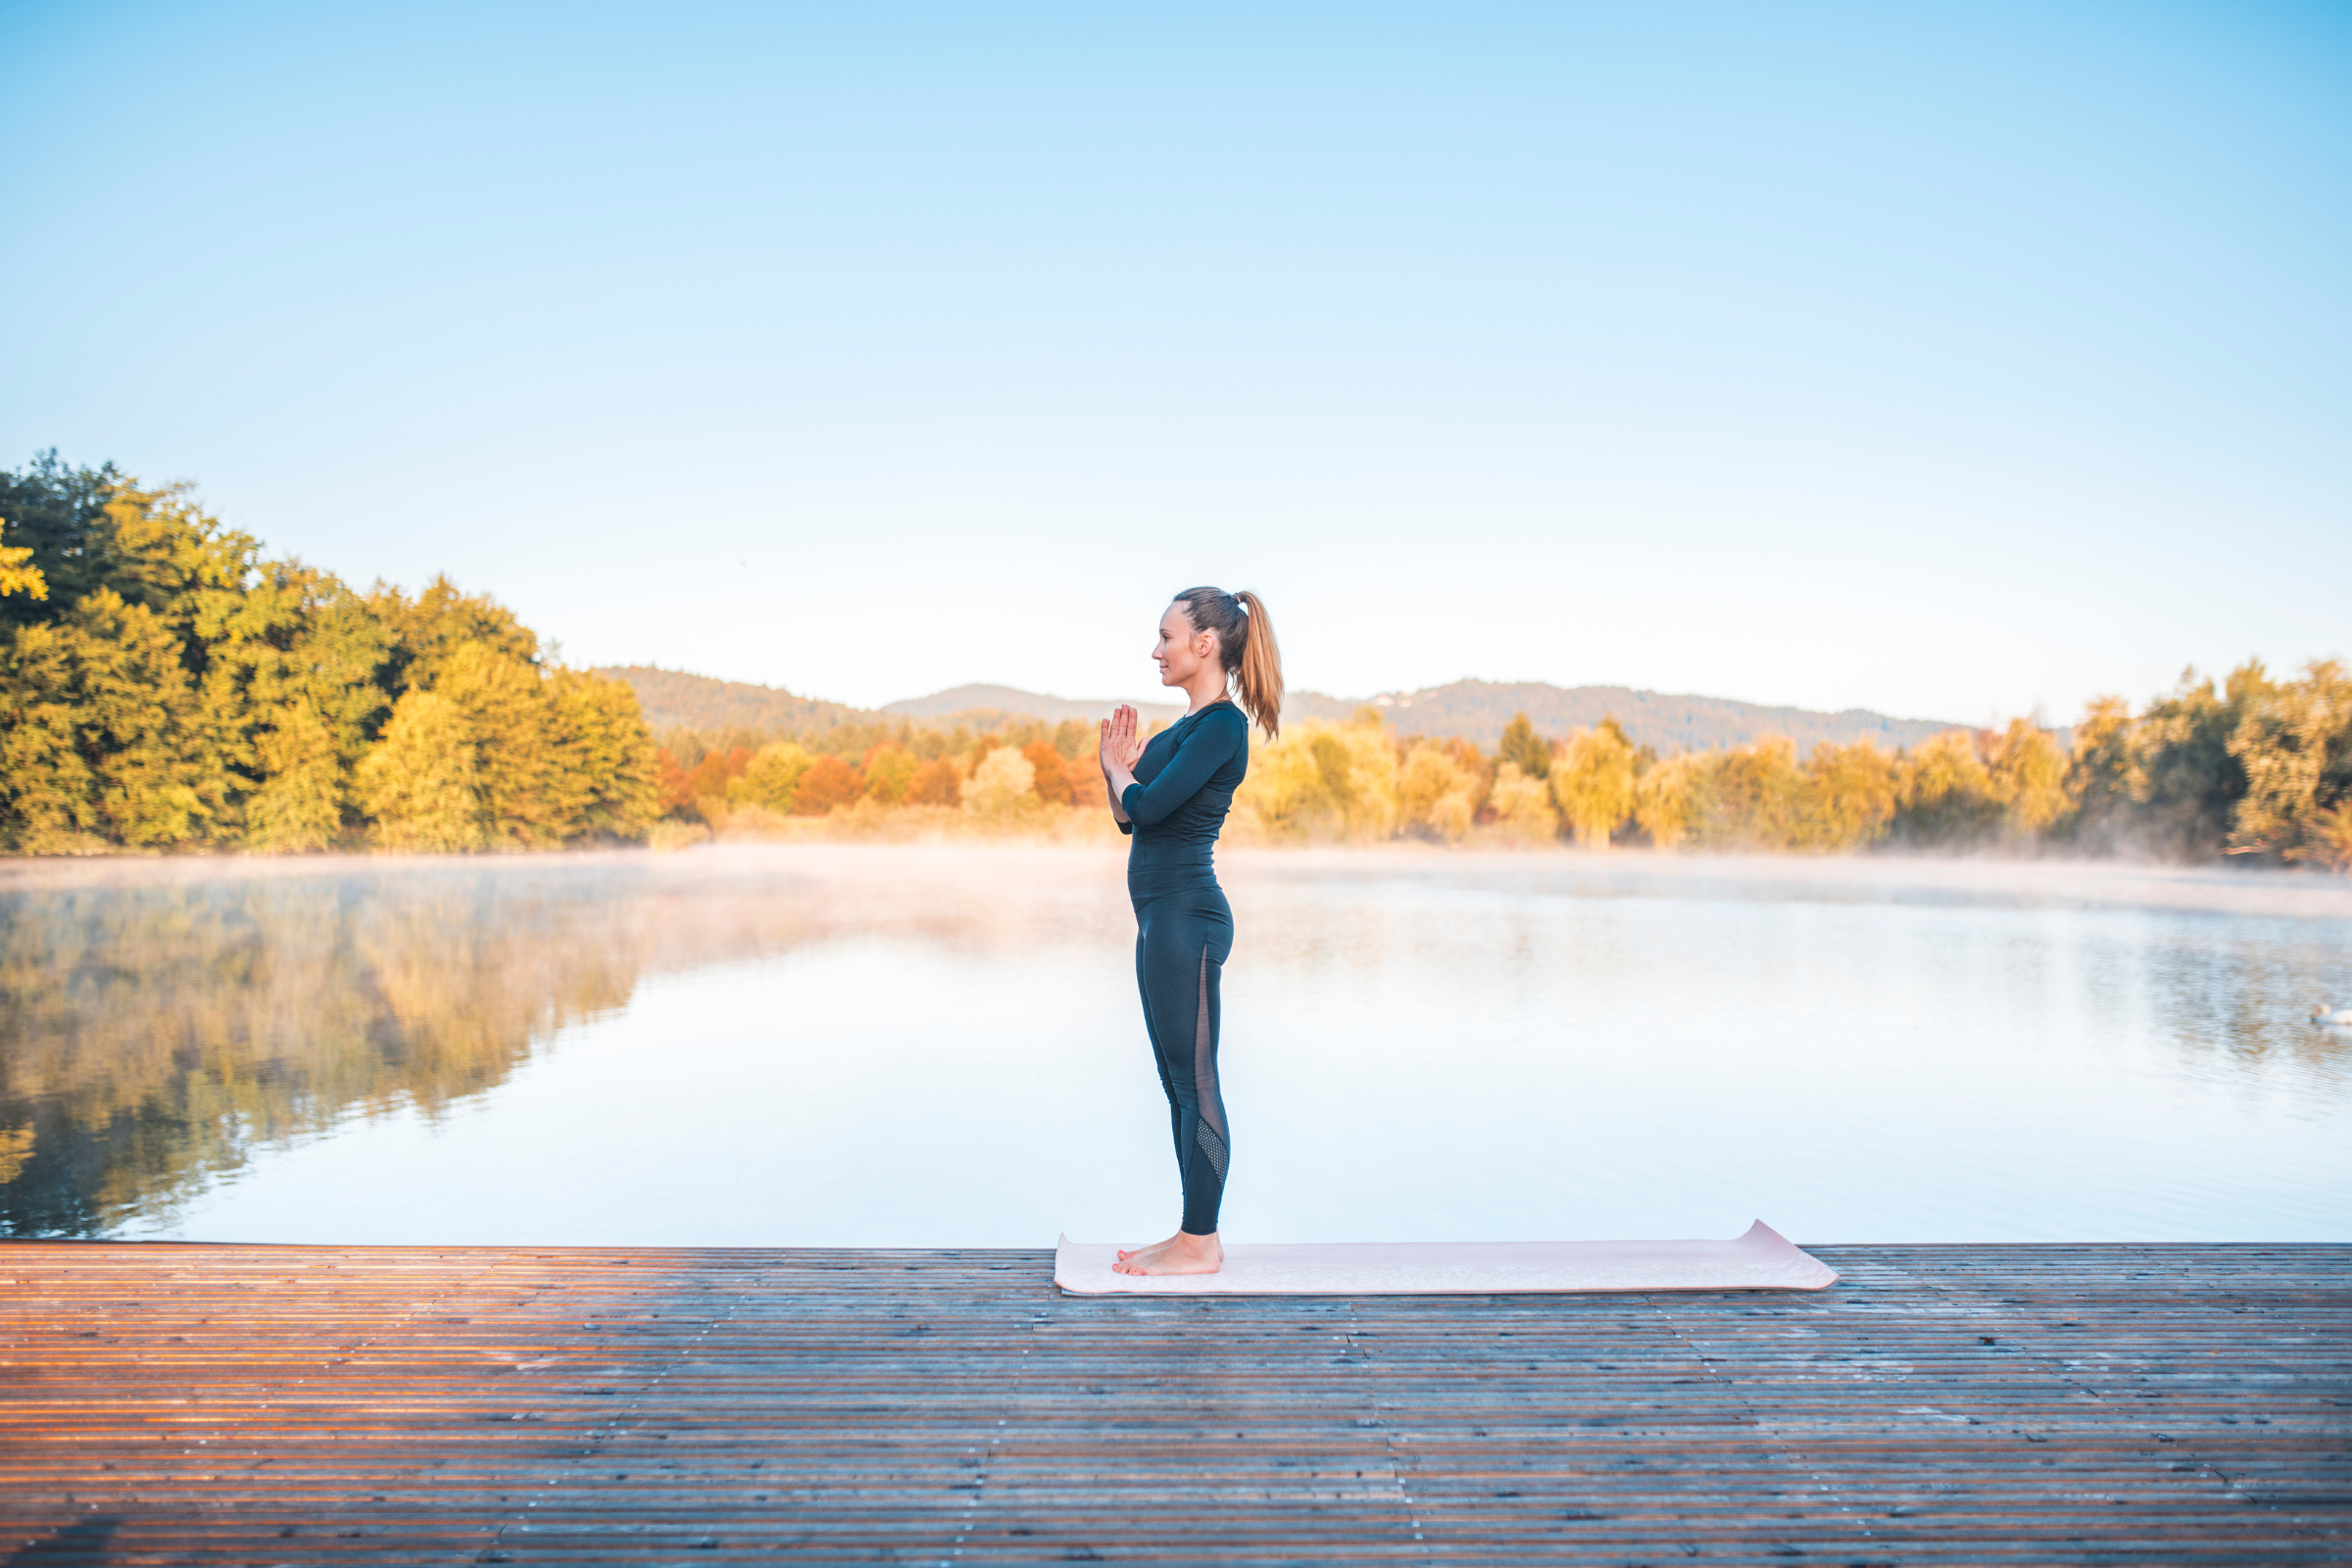 blonde woman with ponytail wearing all black standing on wooden dock in mountain yoga pose